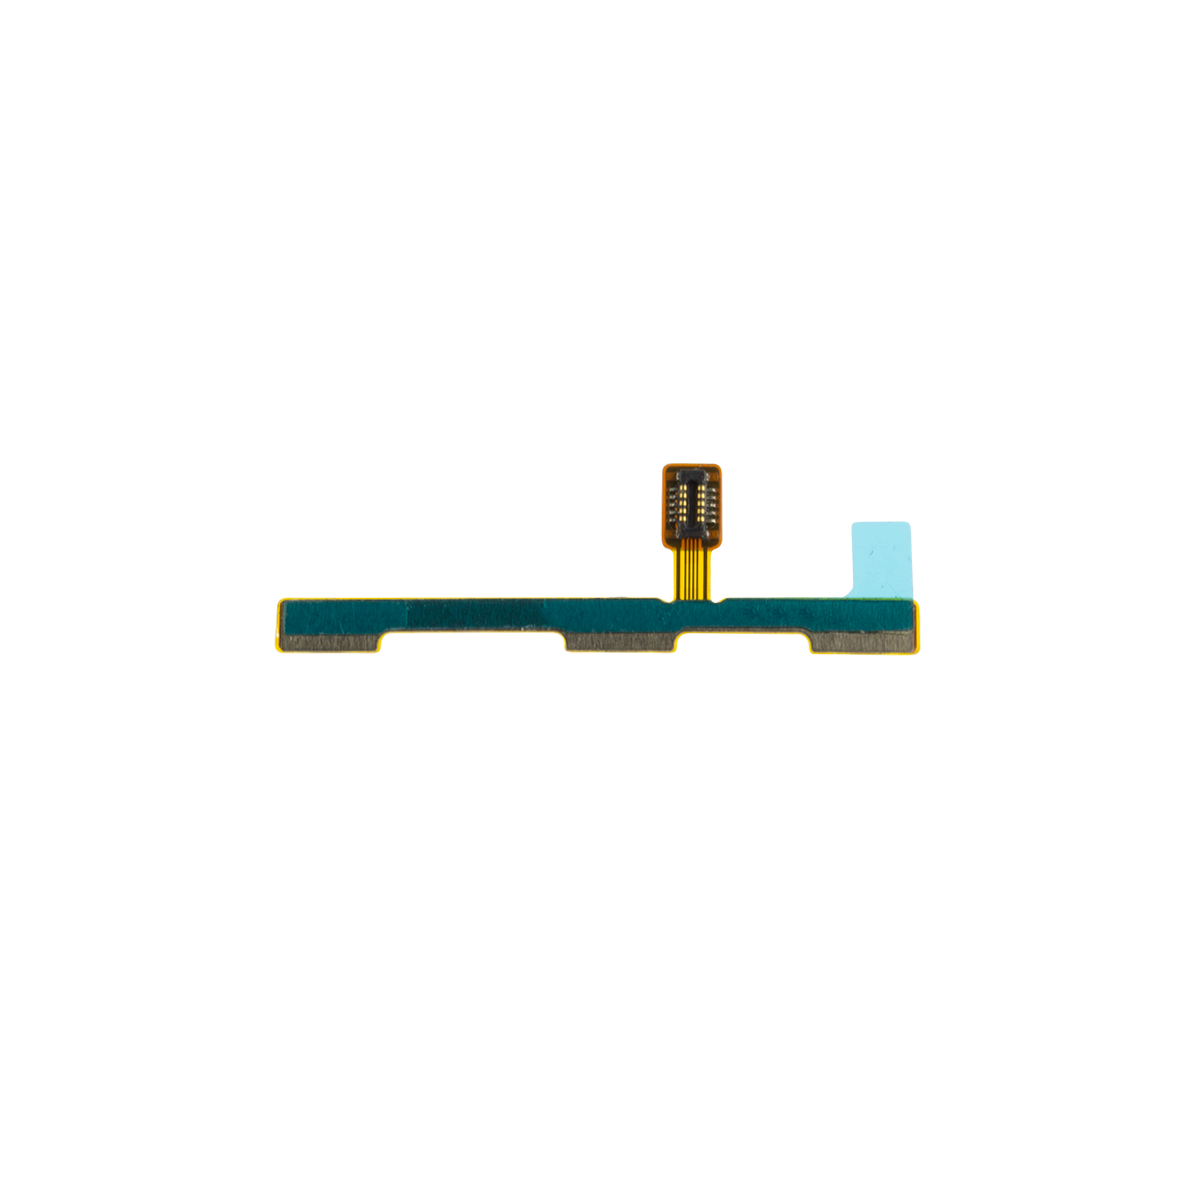 Huawei P10 Lite Power and Volume Button Flex Cable Replacement